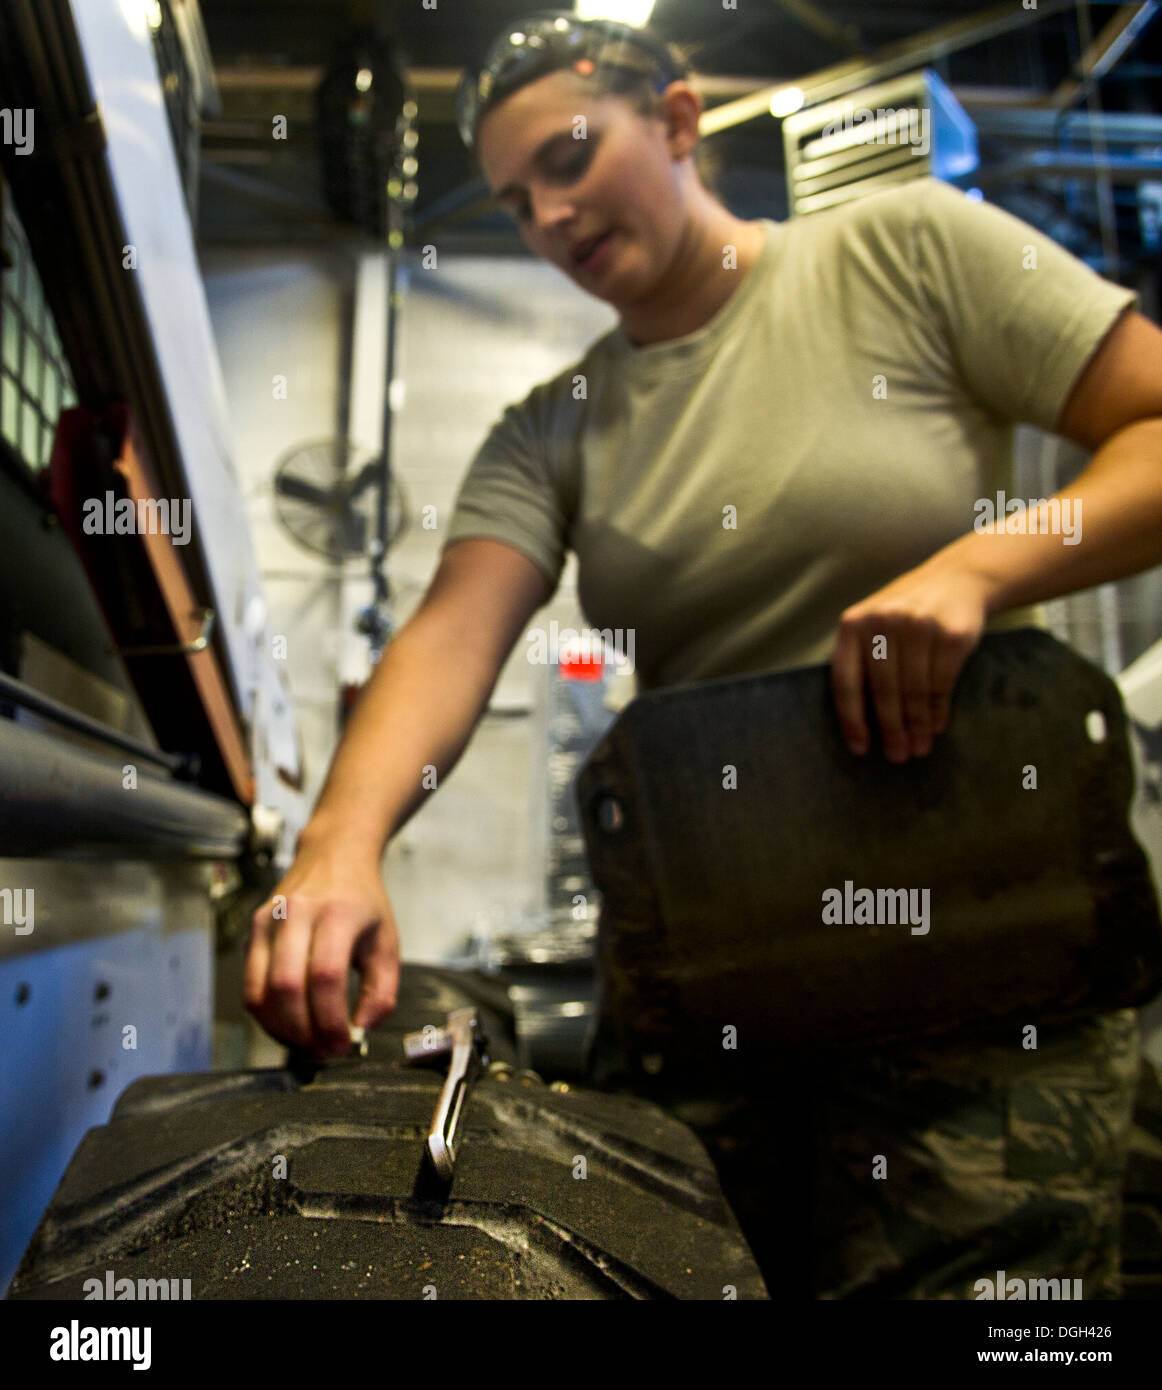 Airman 1st Class Johanna Desimone, 5th Logistics Readiness Squadron vehicle maintainer, puts the side panel on a loader at Minot Air Force Base, N.D., Oct. 16, 2013. The 5th LRS vehicle maintenance flight repairs and maintains various types of vehicles to Stock Photo